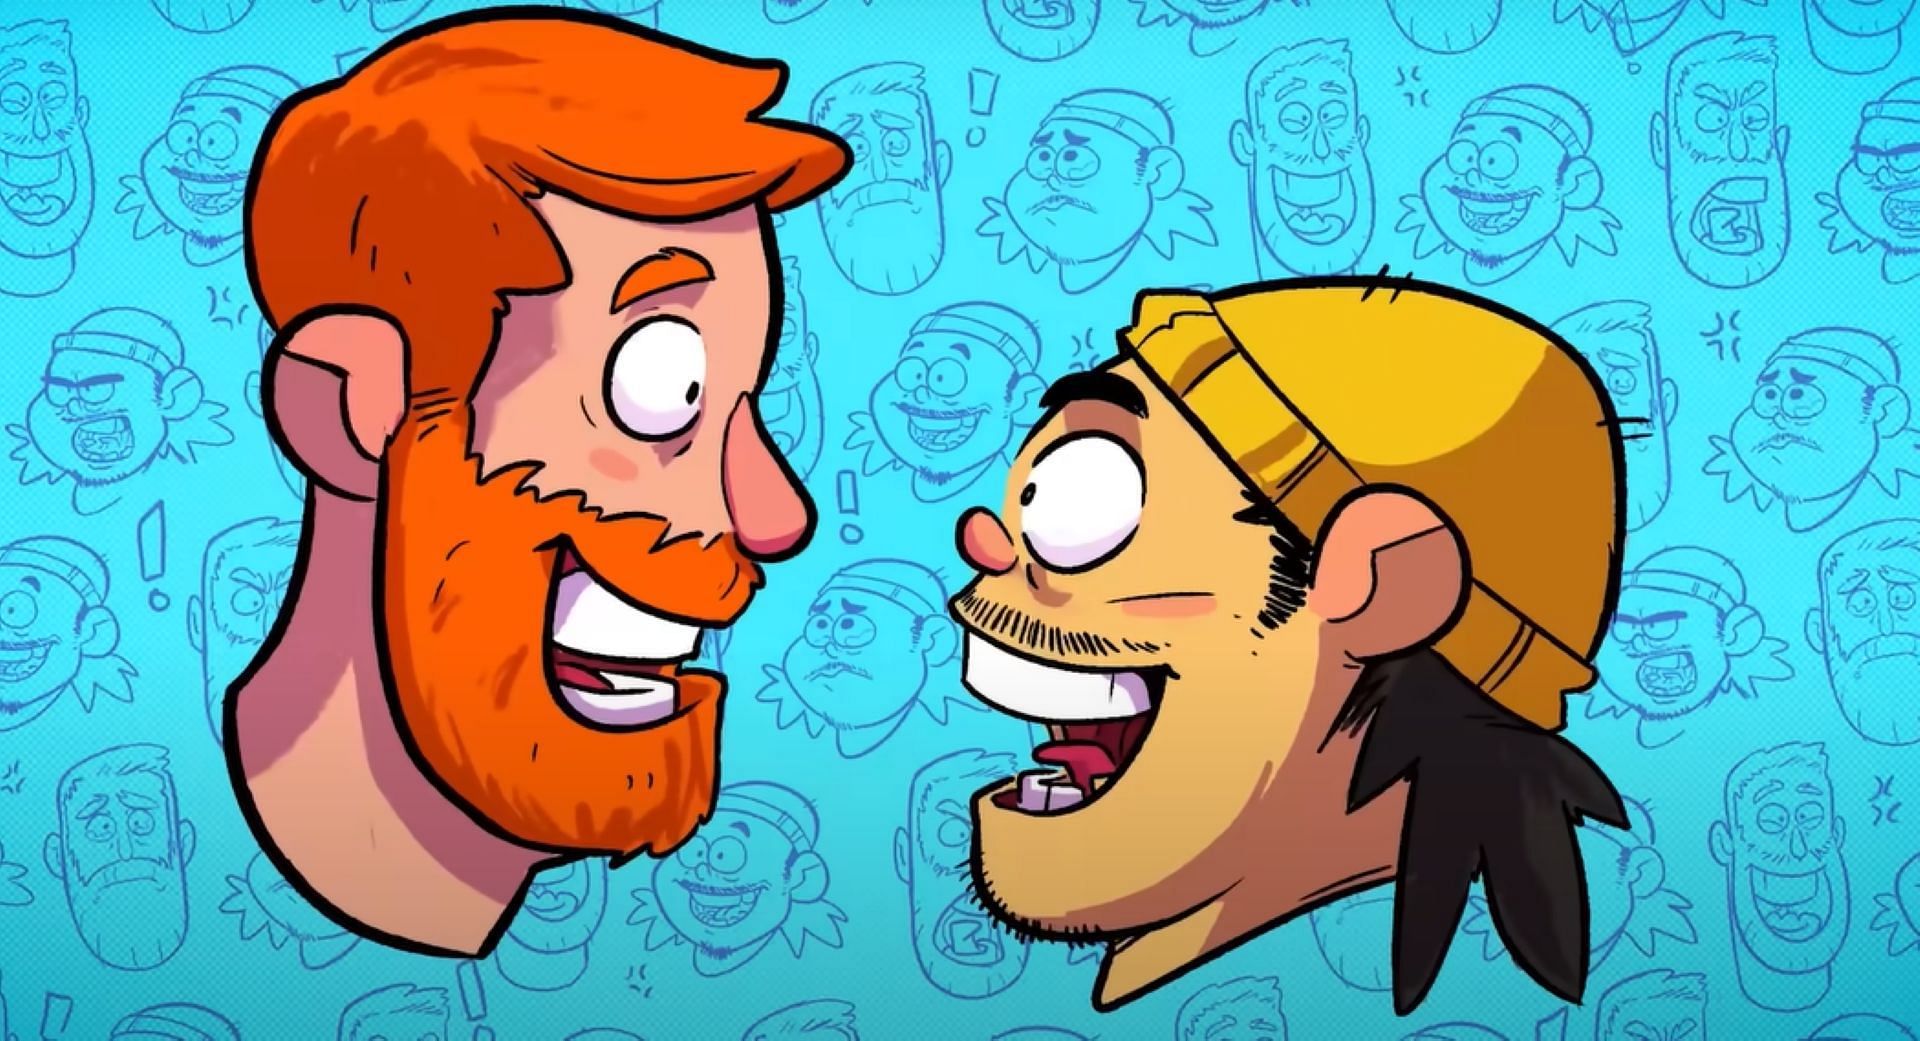 Andrew Santino and Bobby Lee will create Bad Friends for Hulu (Image via YouTube/Bad Friends)